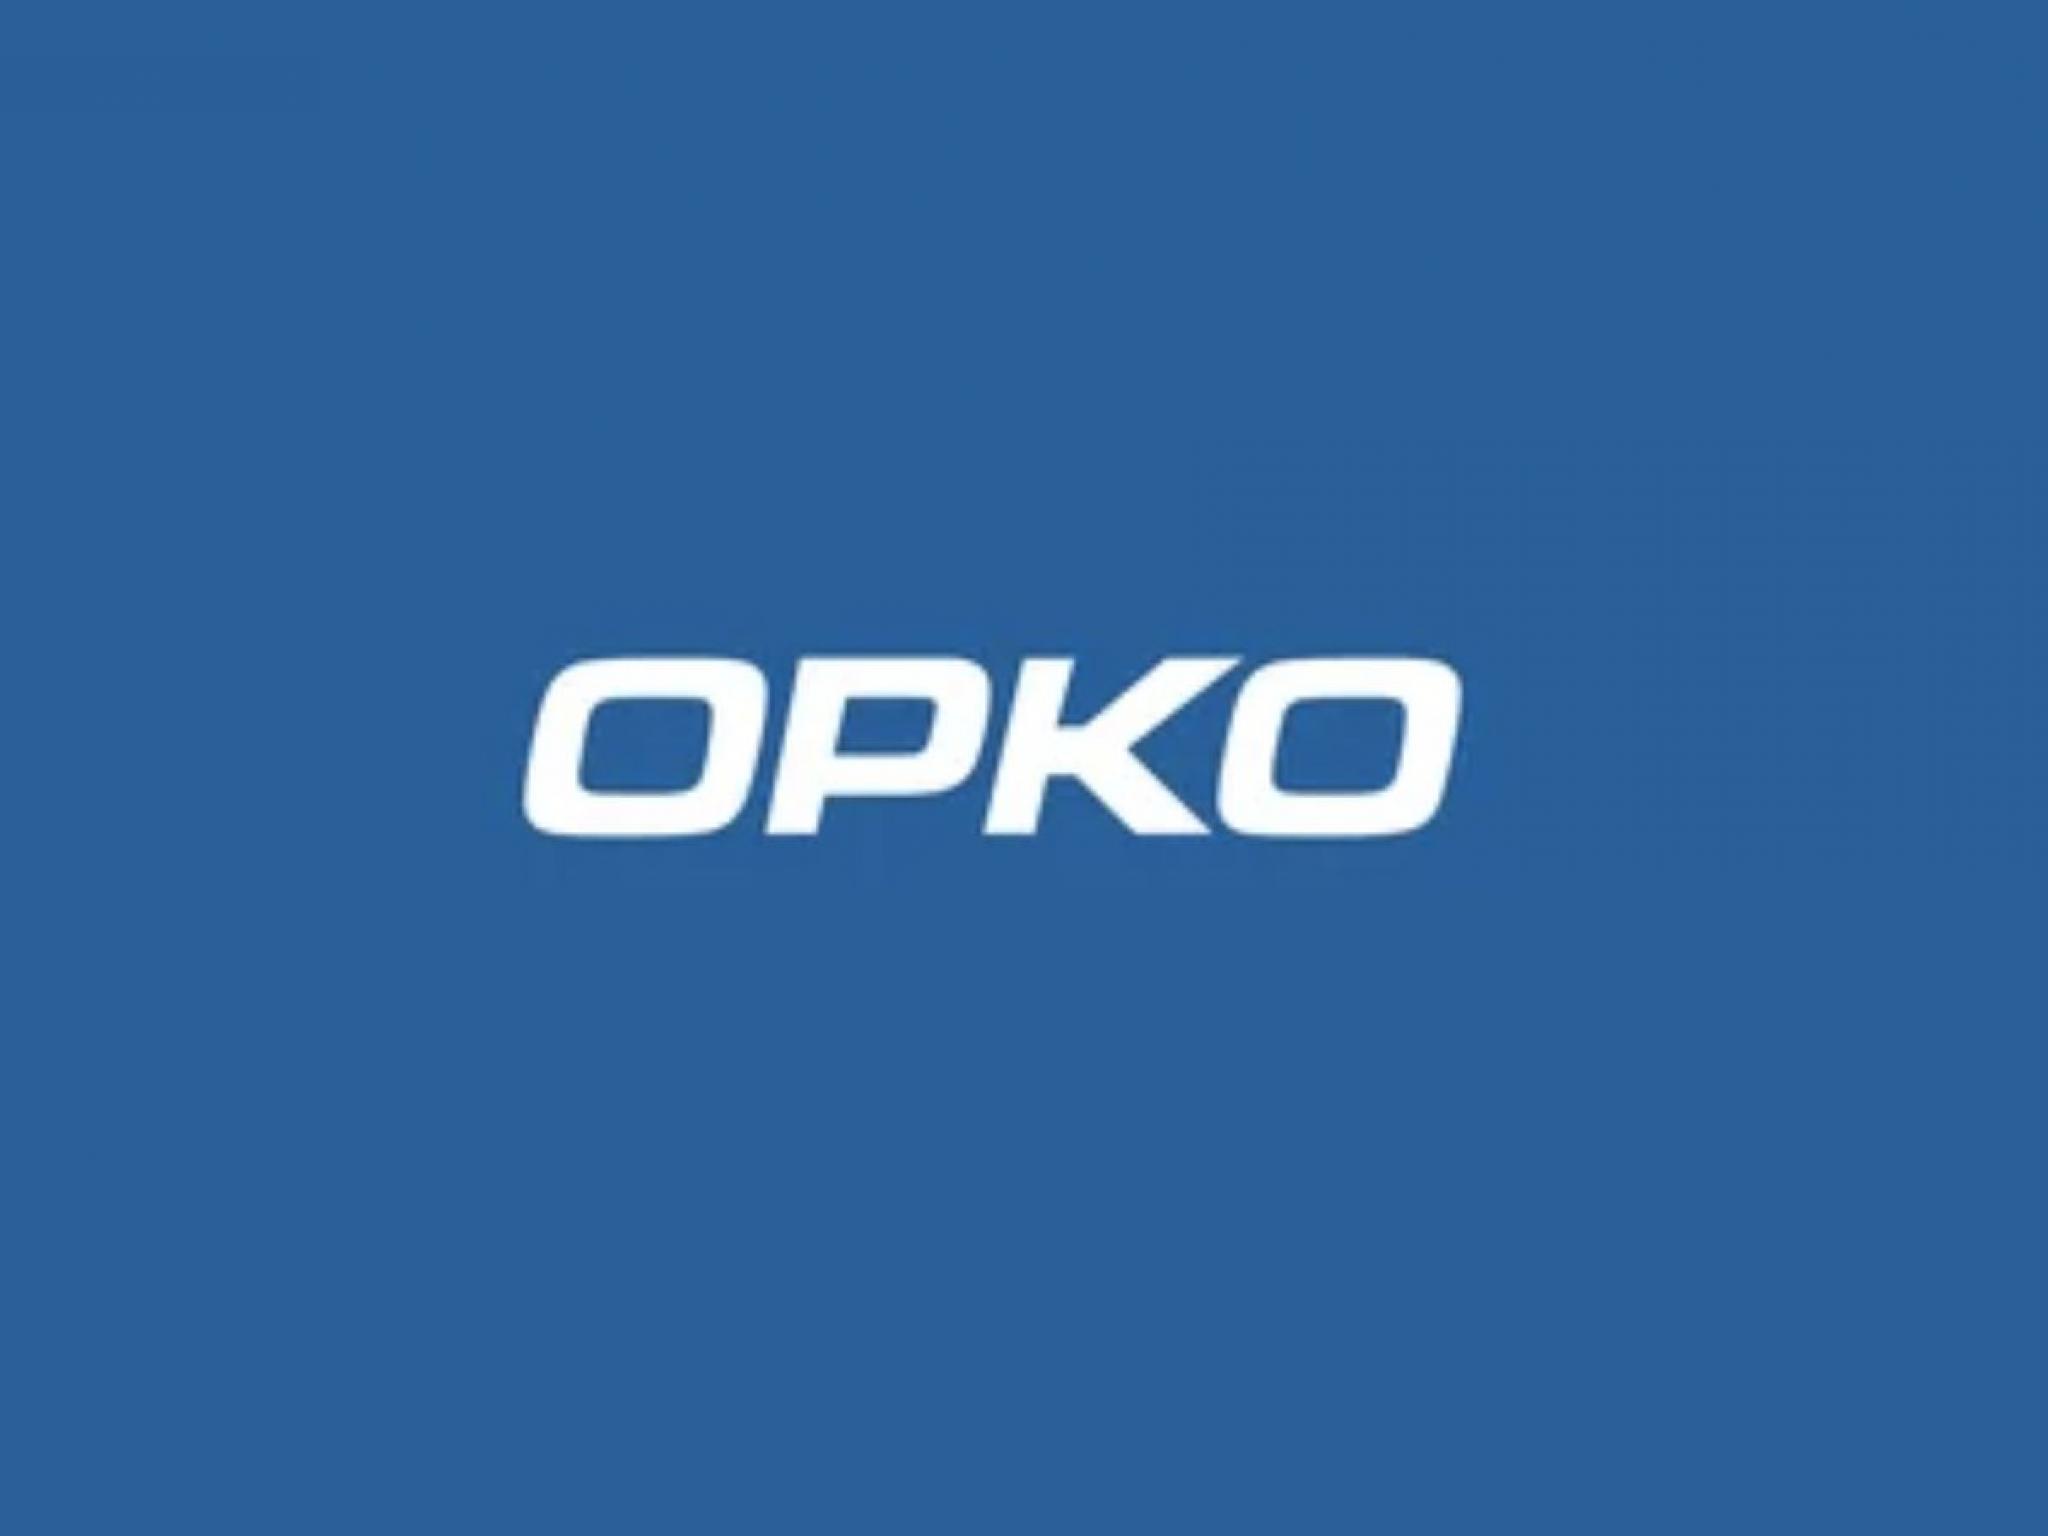  opko-health-and-3-other-stocks-under-5-insiders-are-buying 